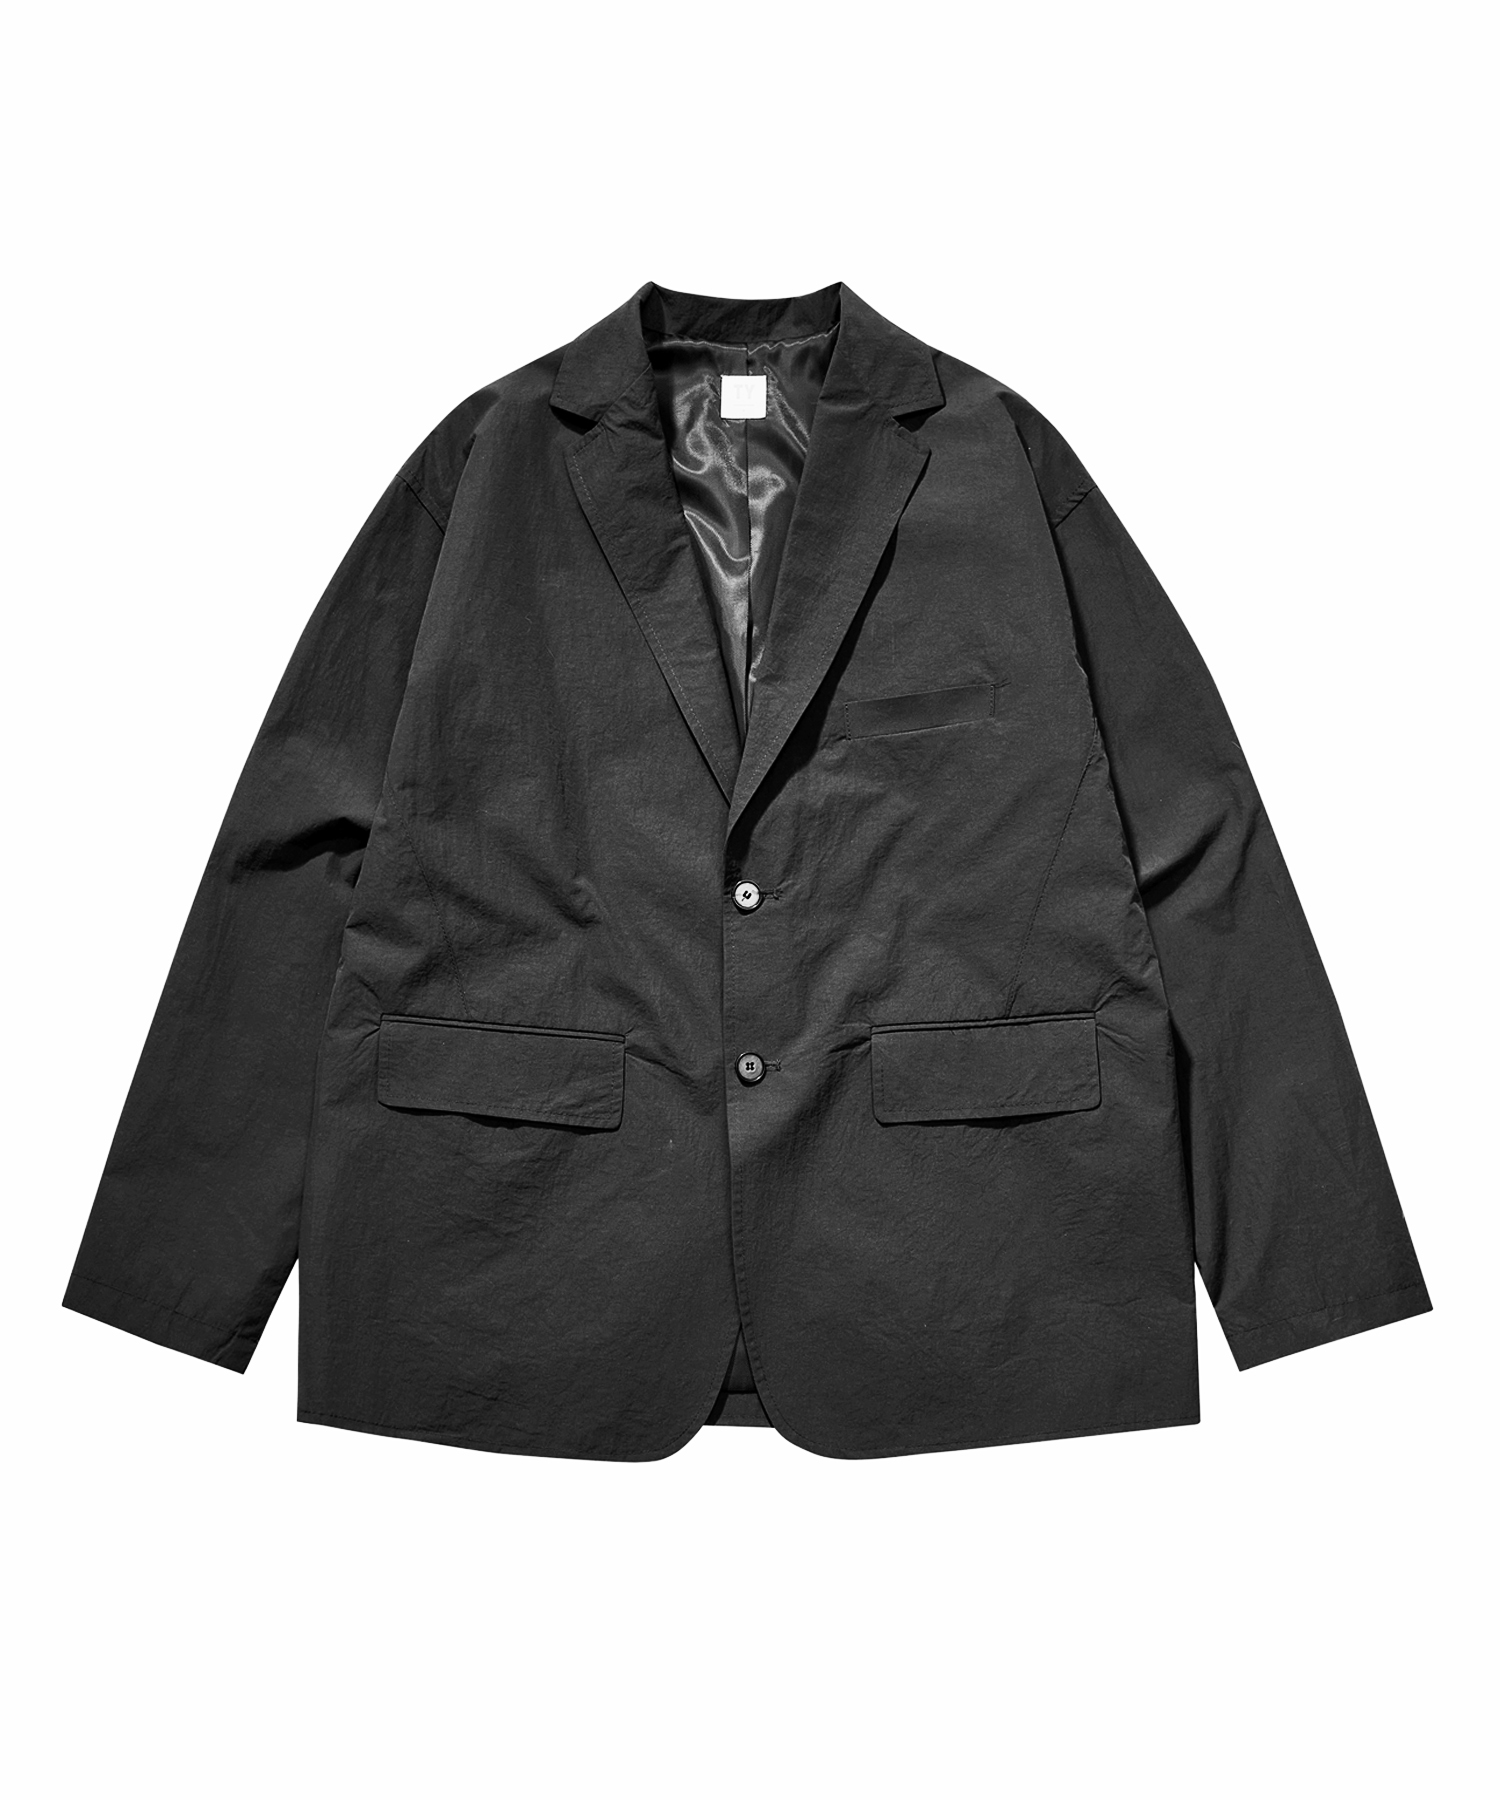 Office casual sports two button jacket_Black